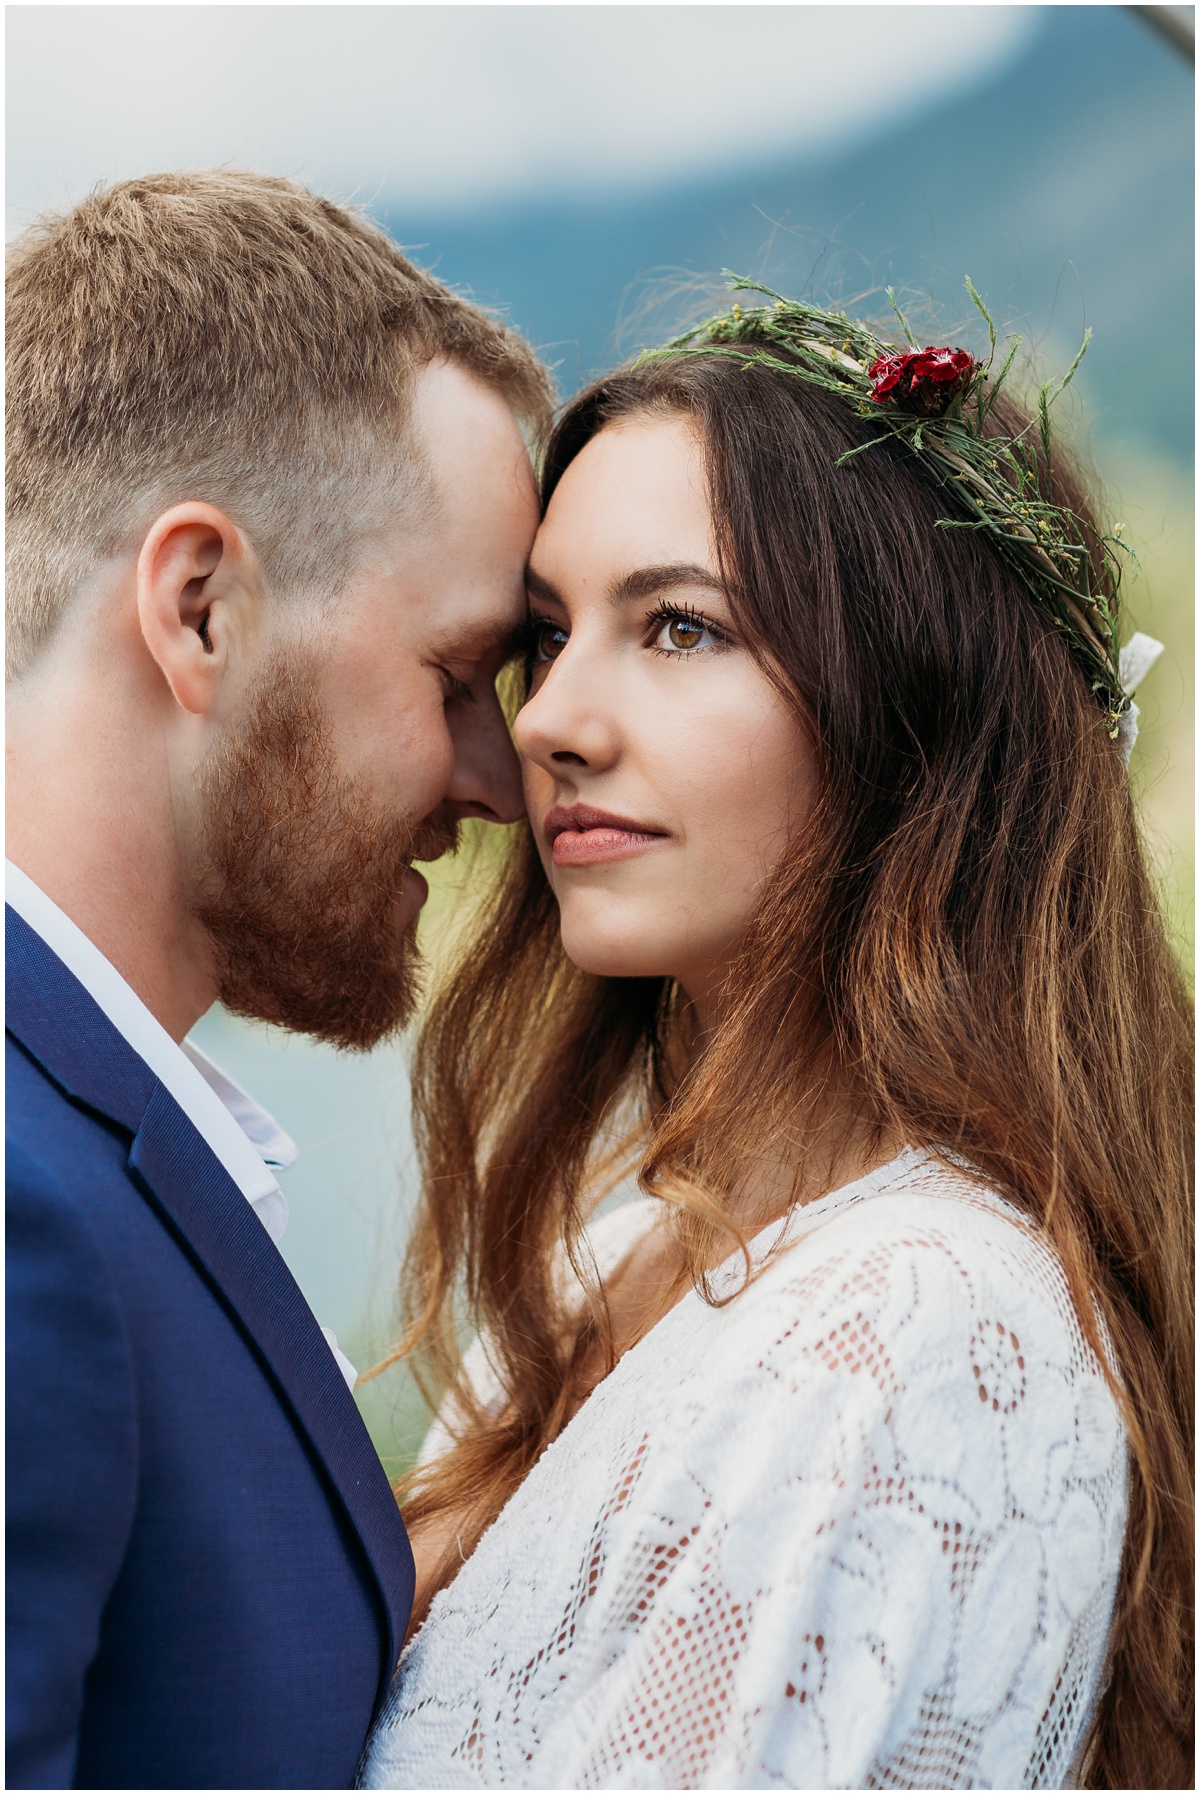 portrait of bride and groom together with flower crown | Gold Creek Pond Washington Elopement Photographer